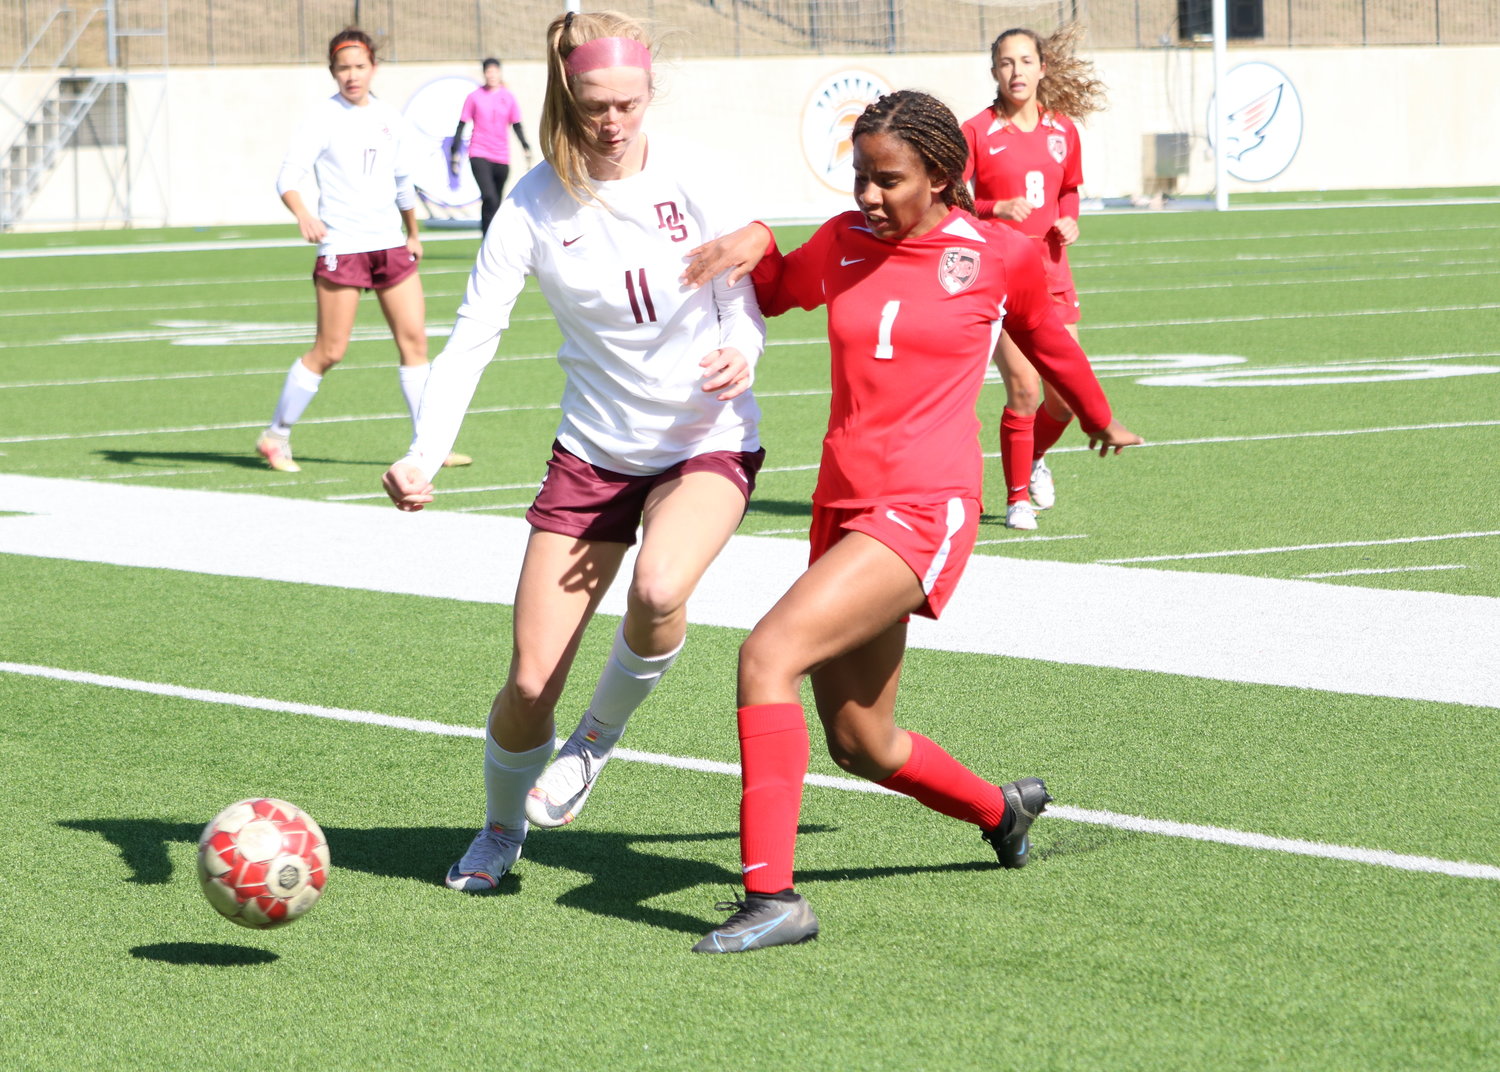 Olyvia Witham makes a tackle during a game between Katy and Dripping Springs at Legacy Stadium on Saturday.